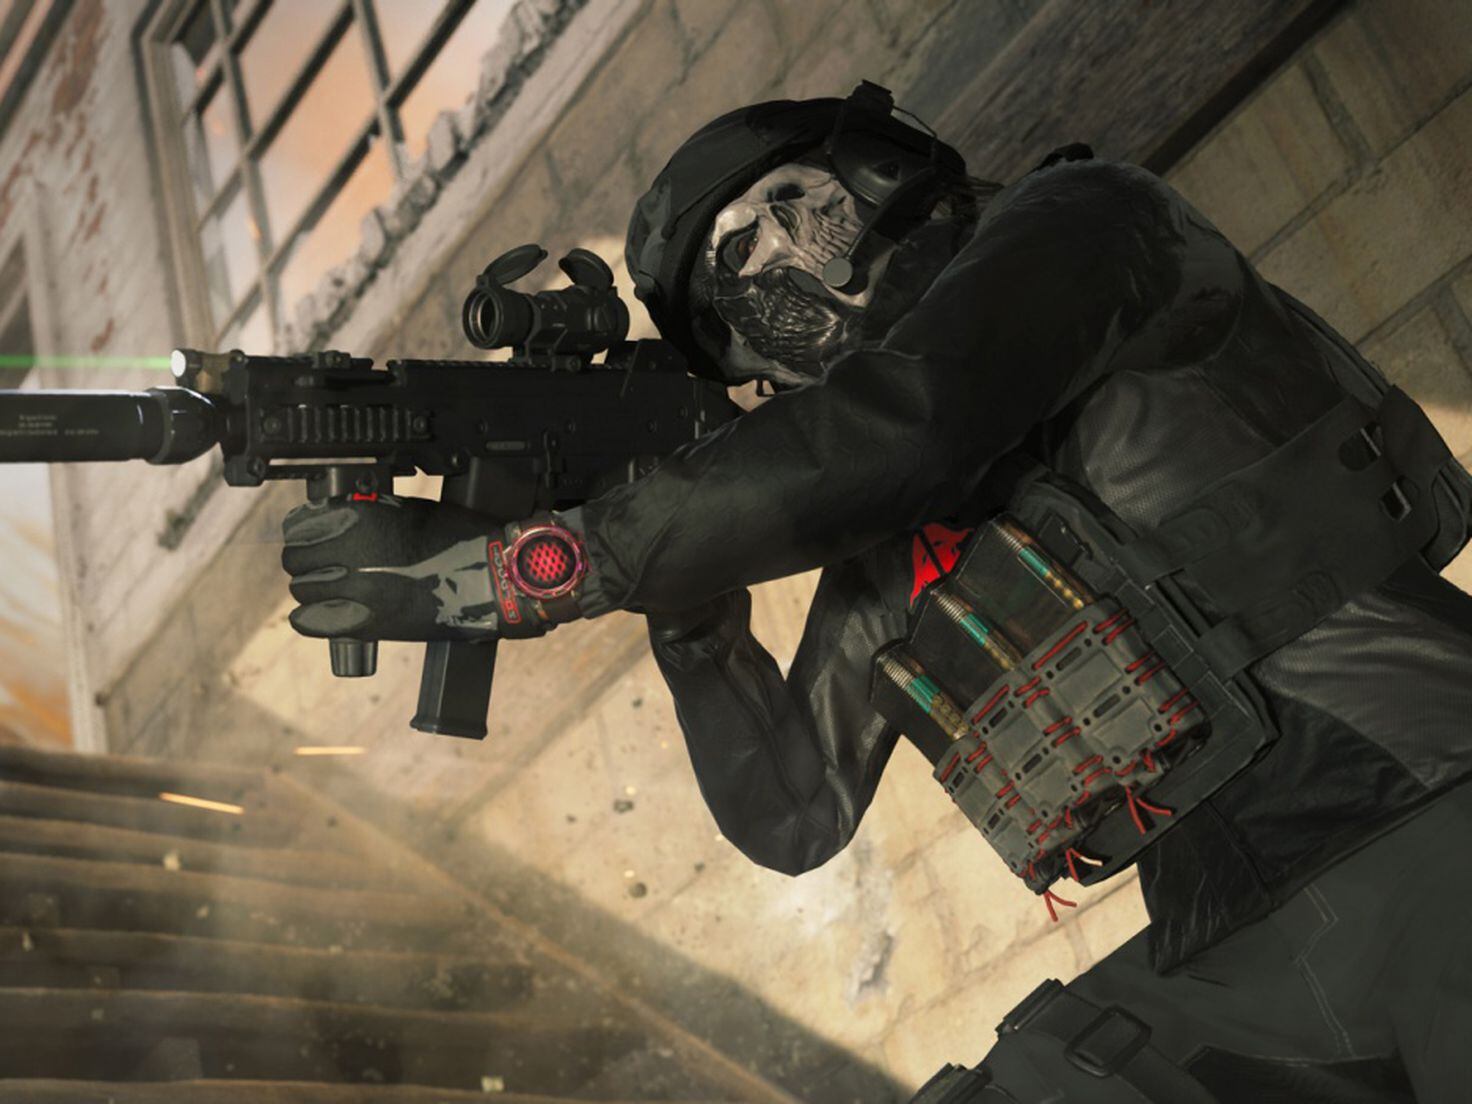 Call of Duty: Modern Warfare III announced, continues story of